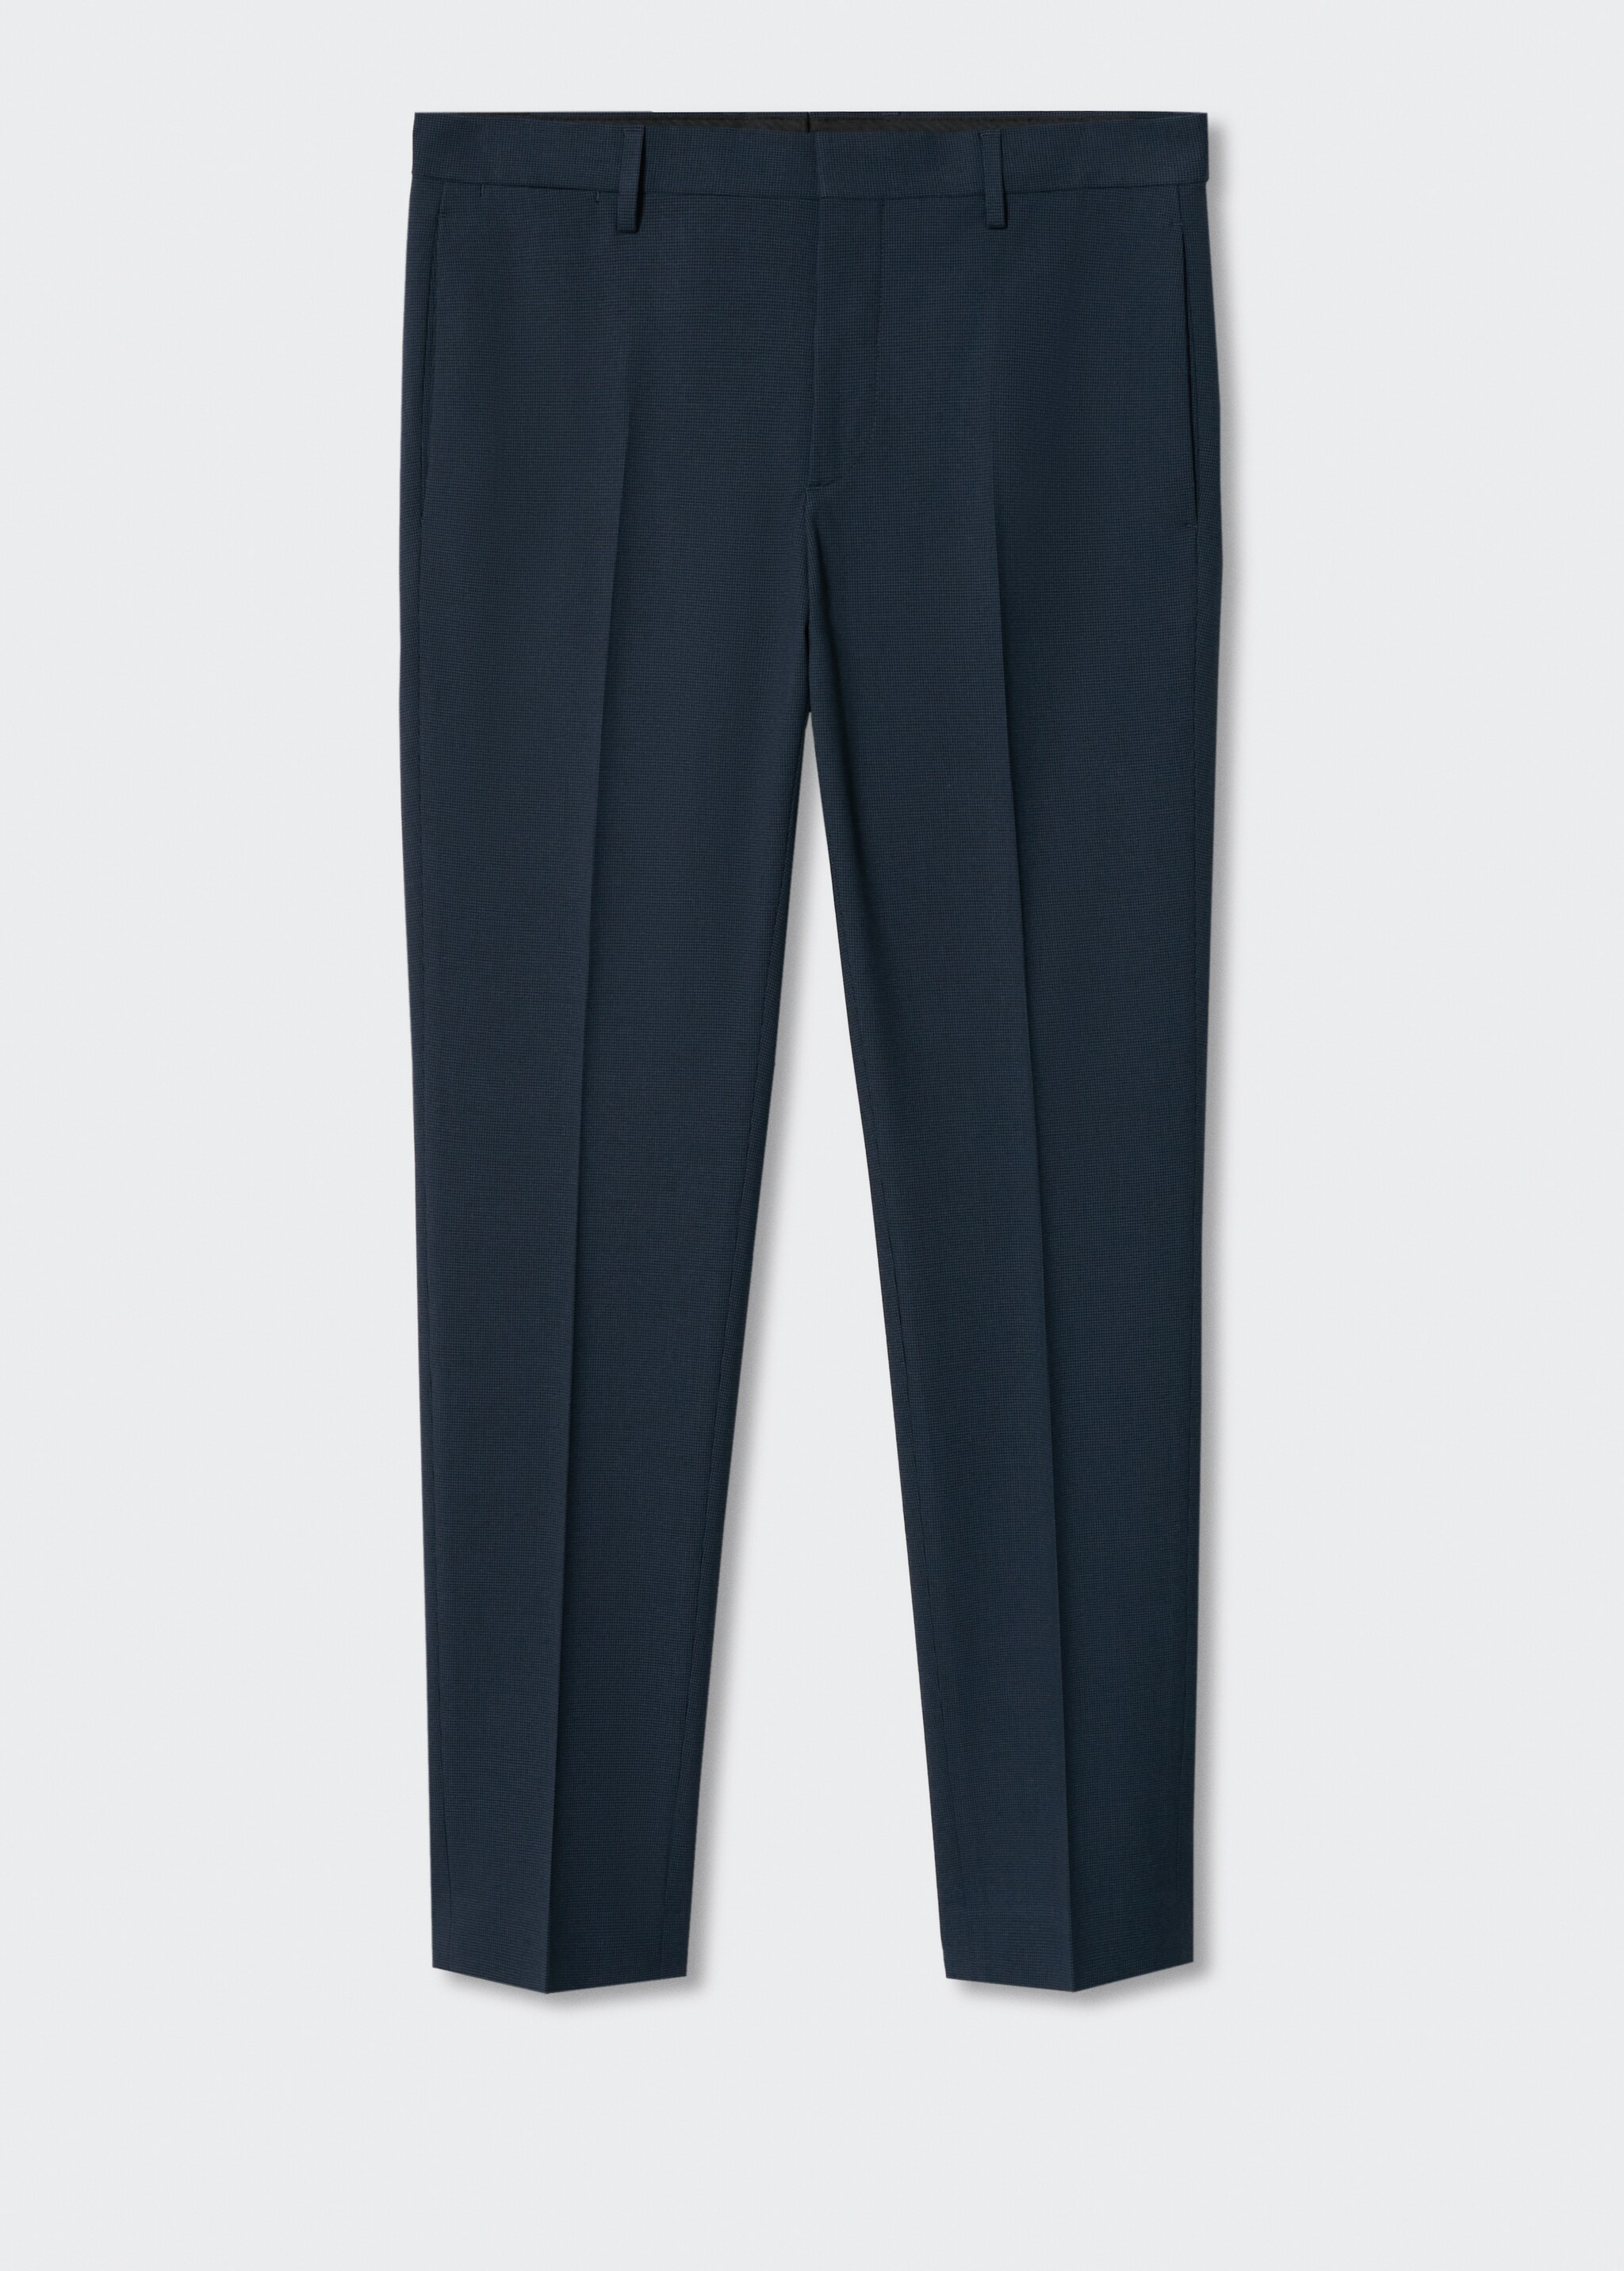 Super slim fit microstructure suit trousers - Article without model